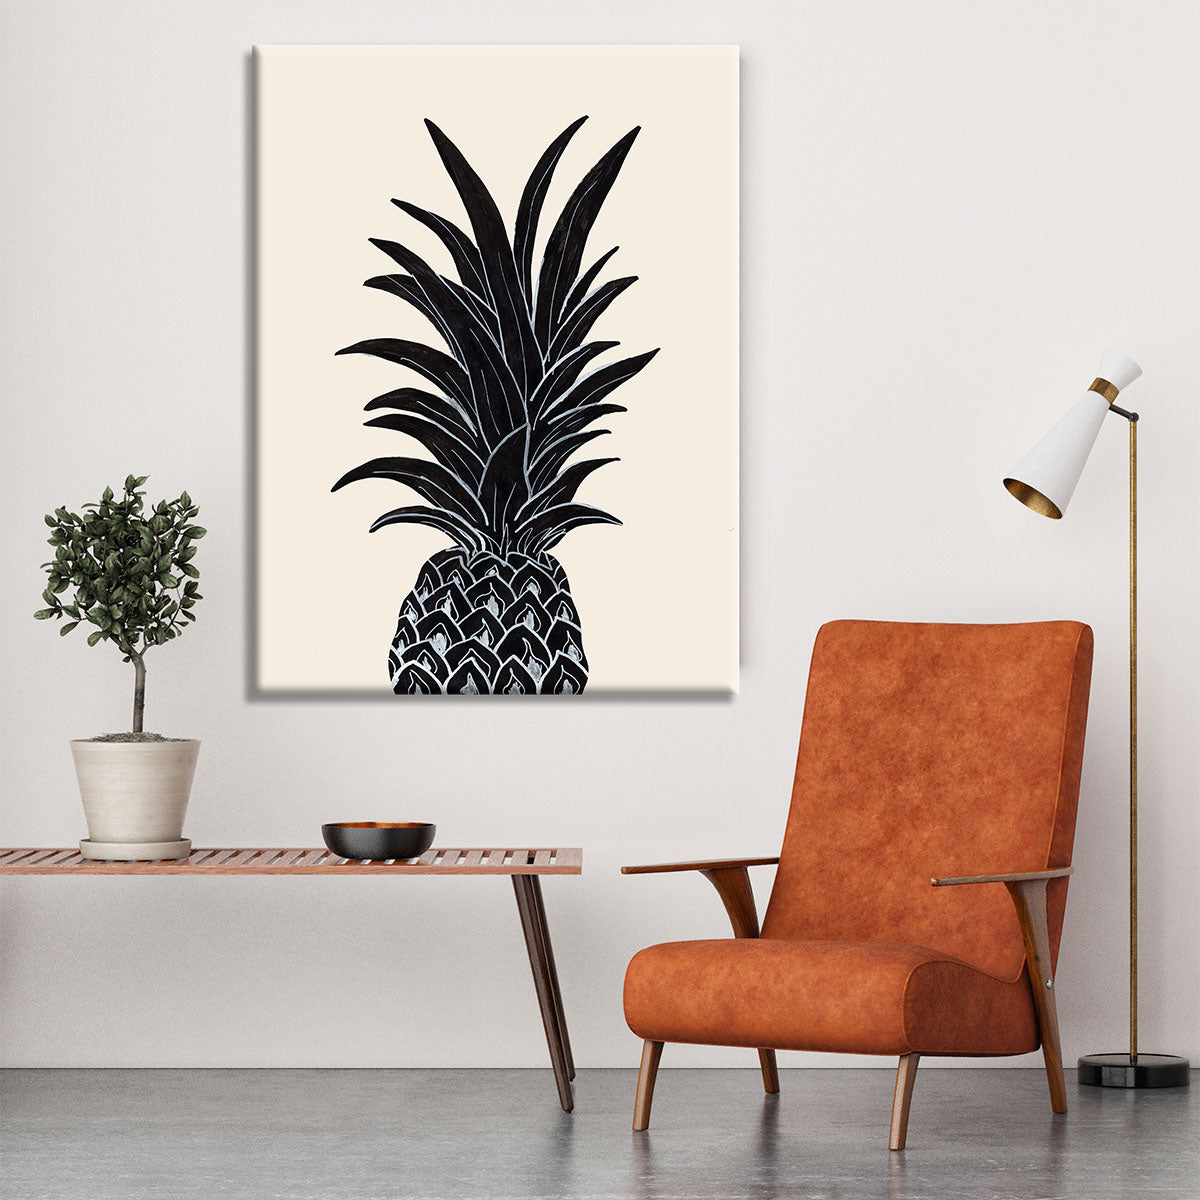 Black Pineapple Canvas Print or Poster - 1x - 6